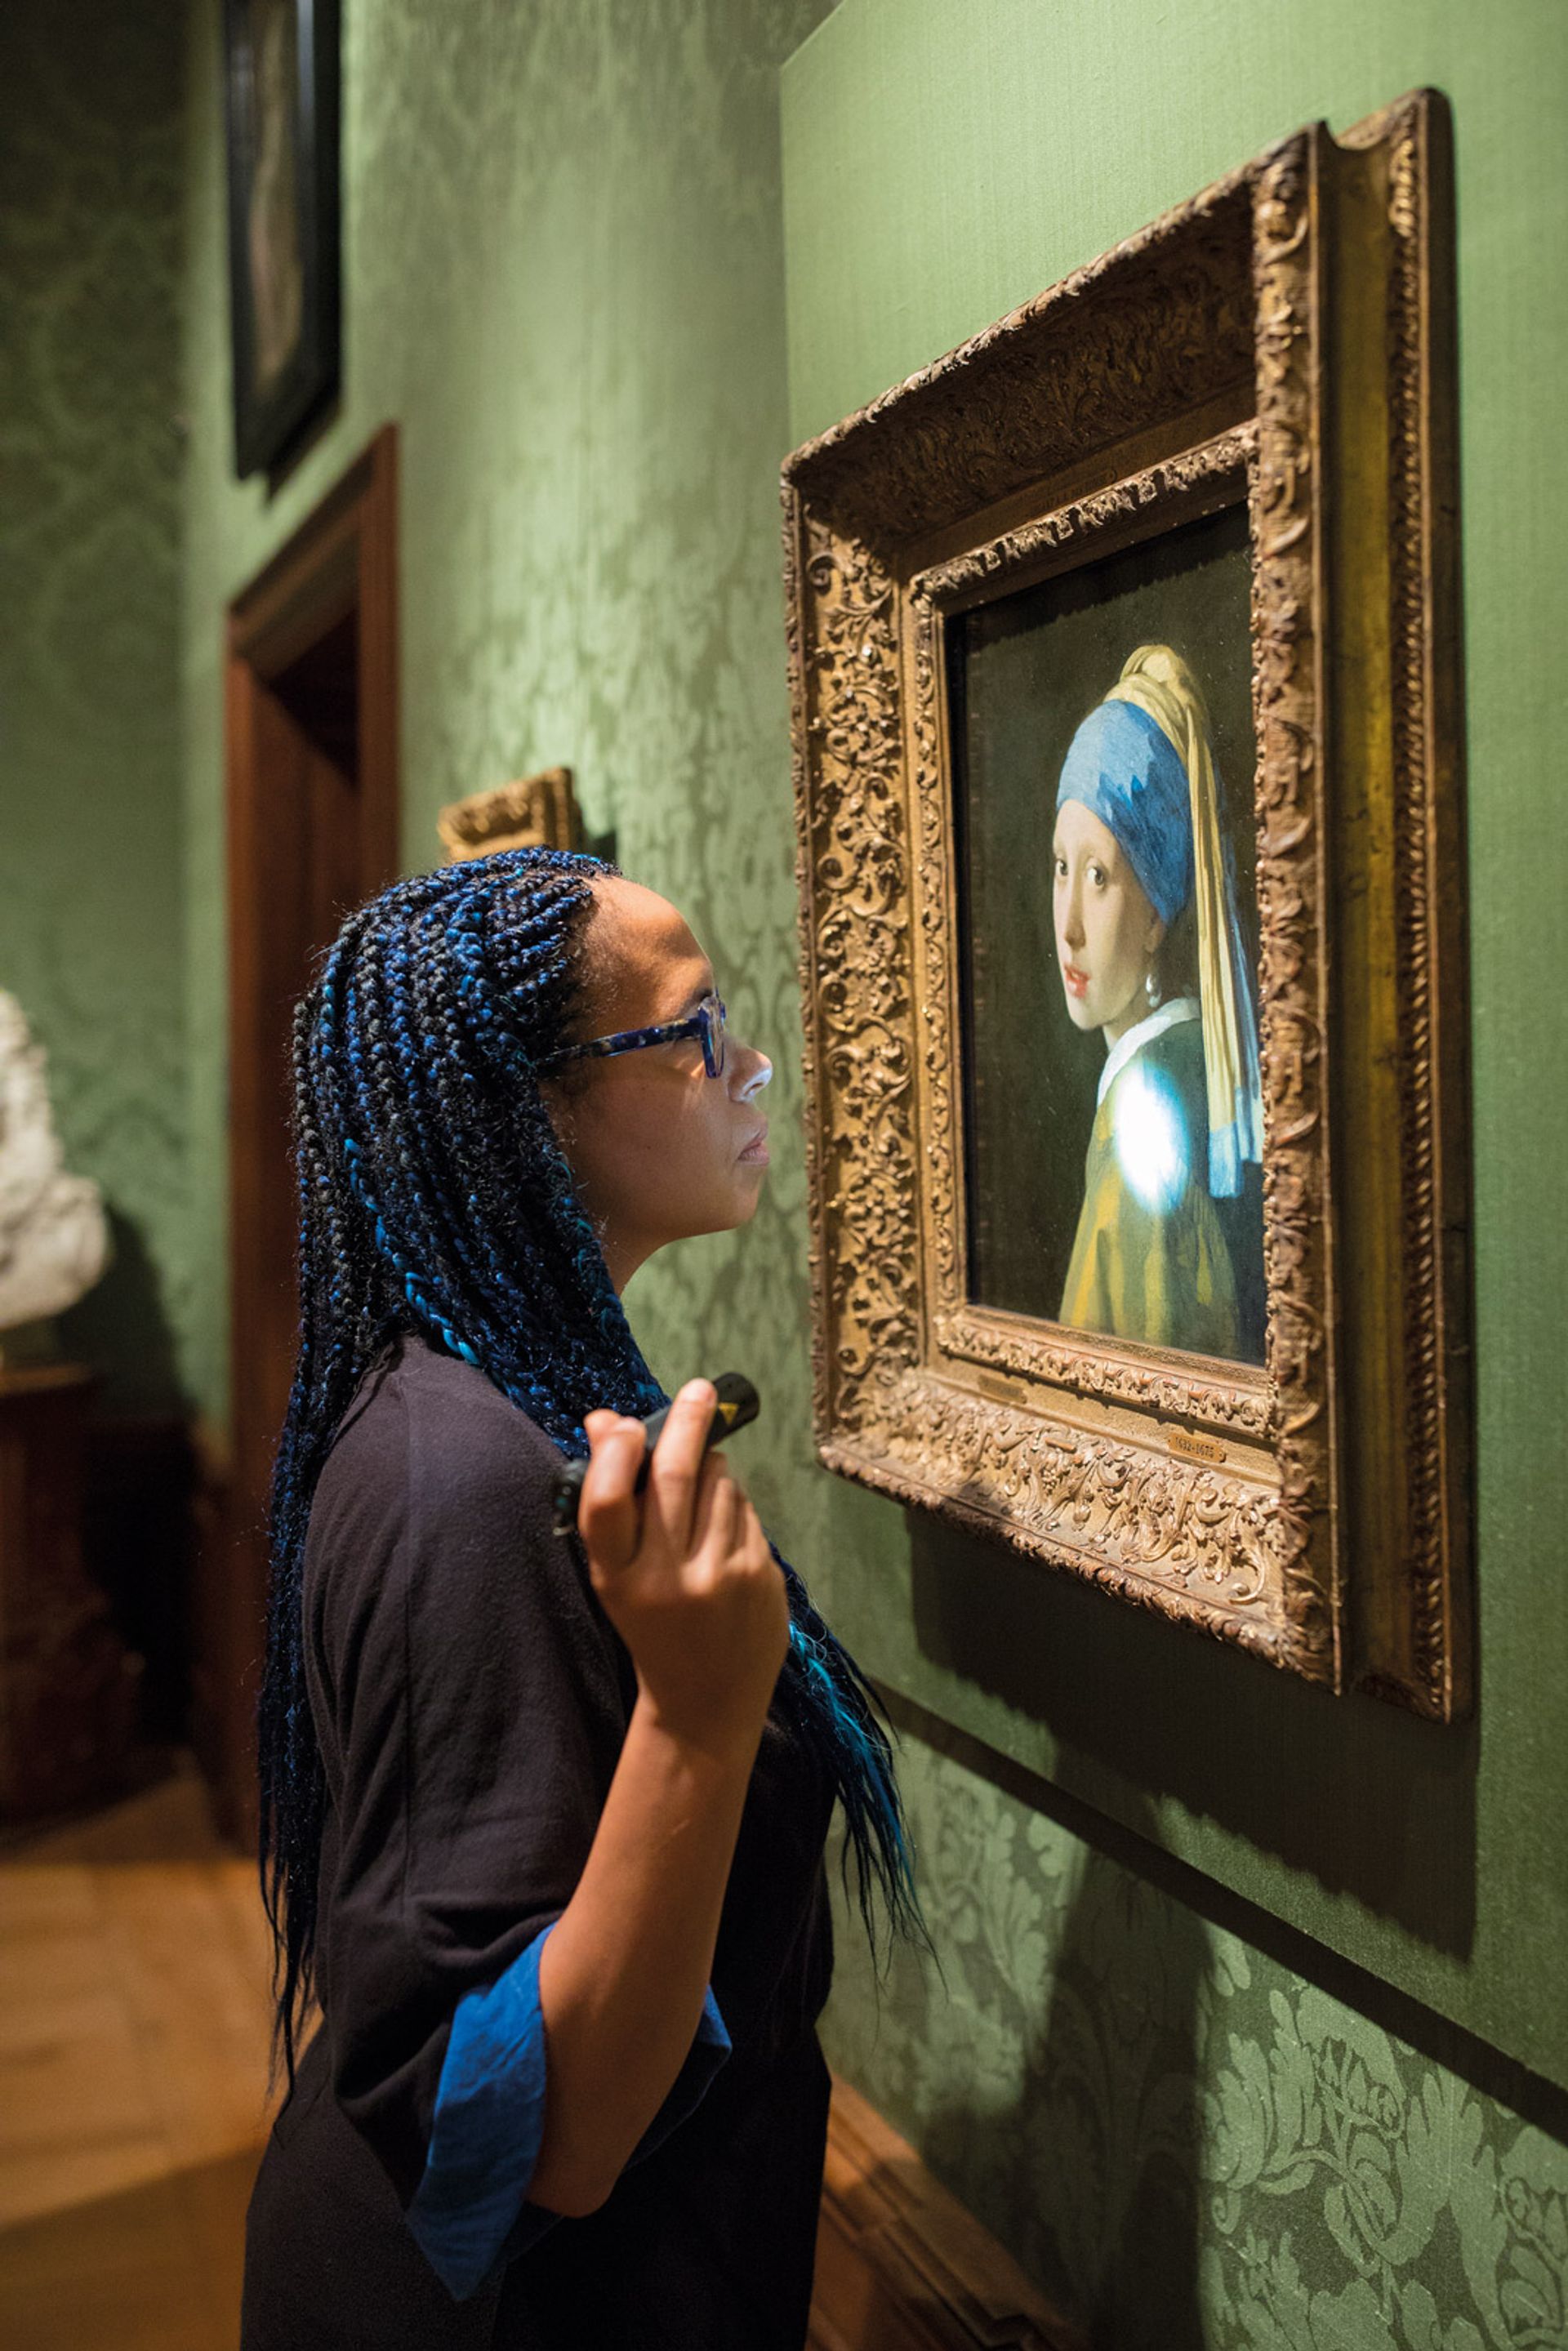 Vermeer’s Girl with a Pearl Earring underwent a very public analysis © Ivo Hoekstra; courtesy of the Mauritshuis, The Hague